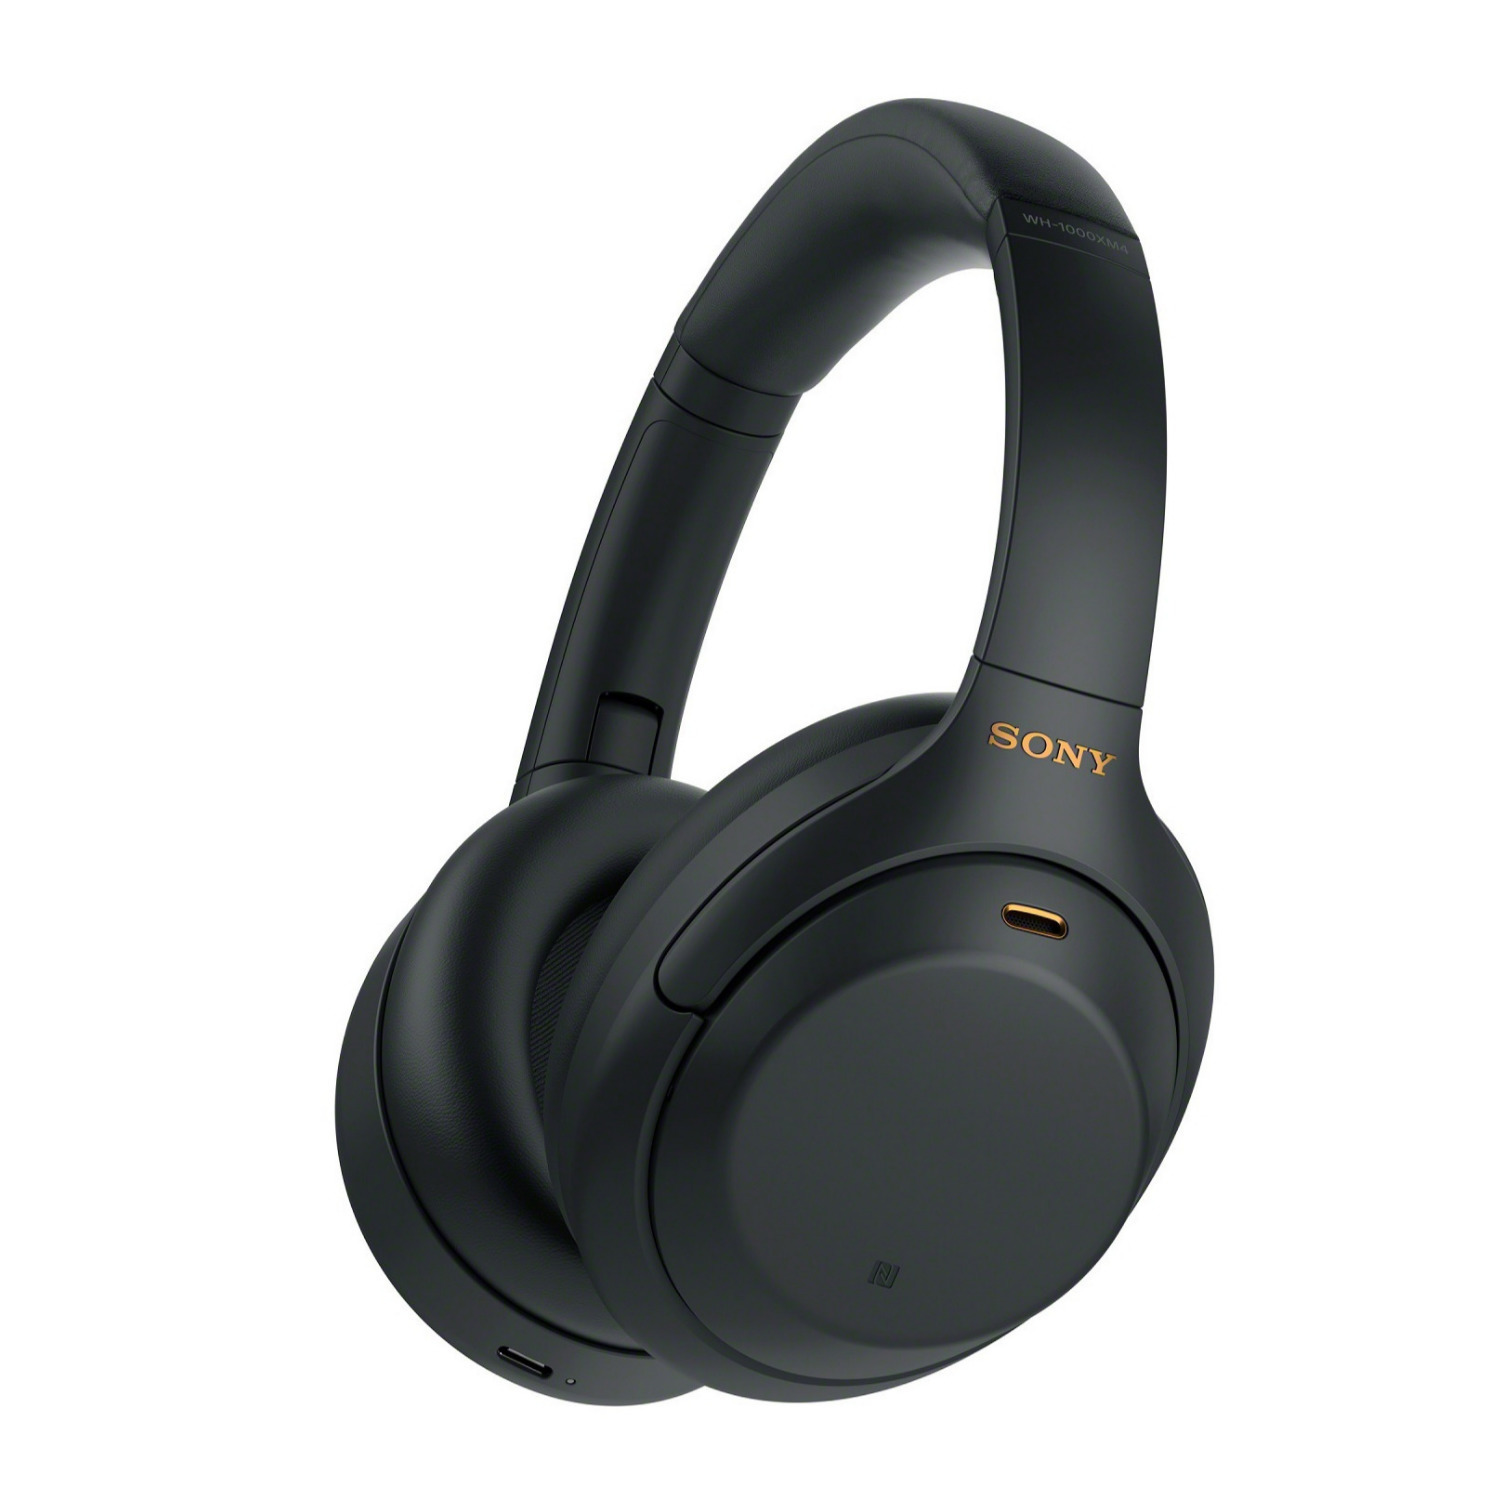 Sony Bluetooth Noise-Canceling Over-Ear Headphones, Black, WH1000XM4B_K3 - image 5 of 14